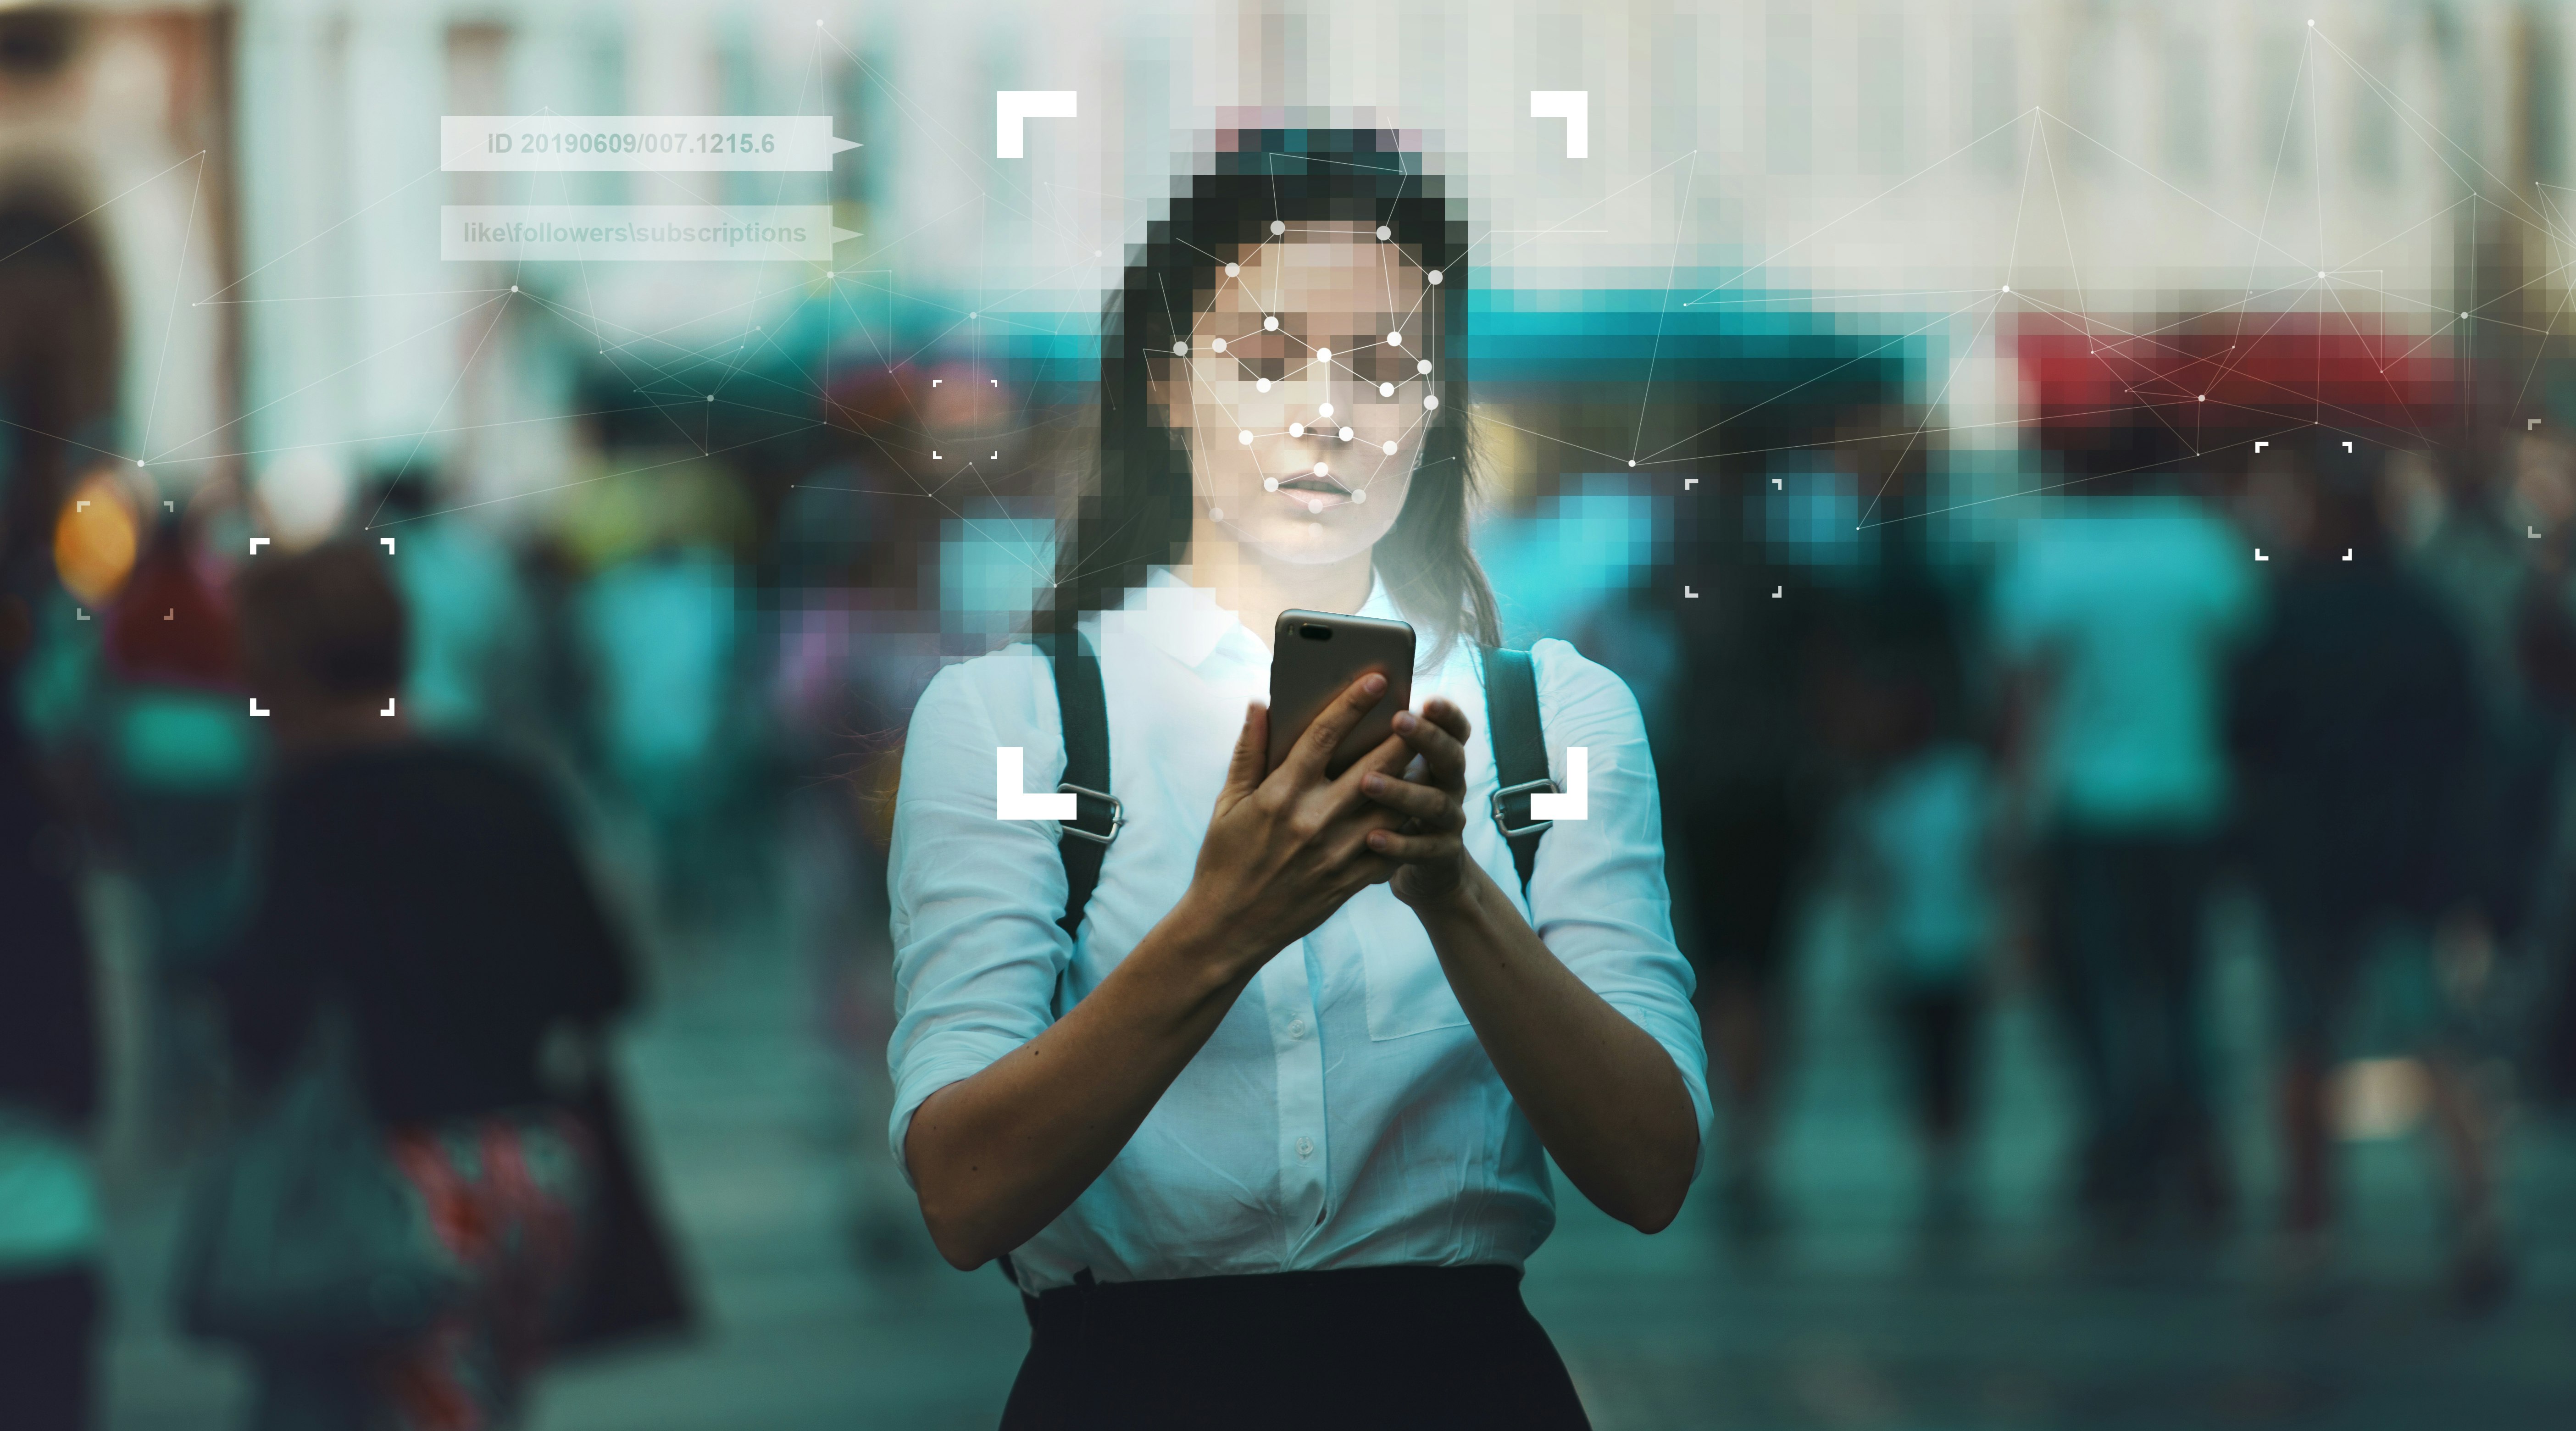 How to use machine learning applications without having to worry about privacy blog post hero image, woman with blurred face holding phone